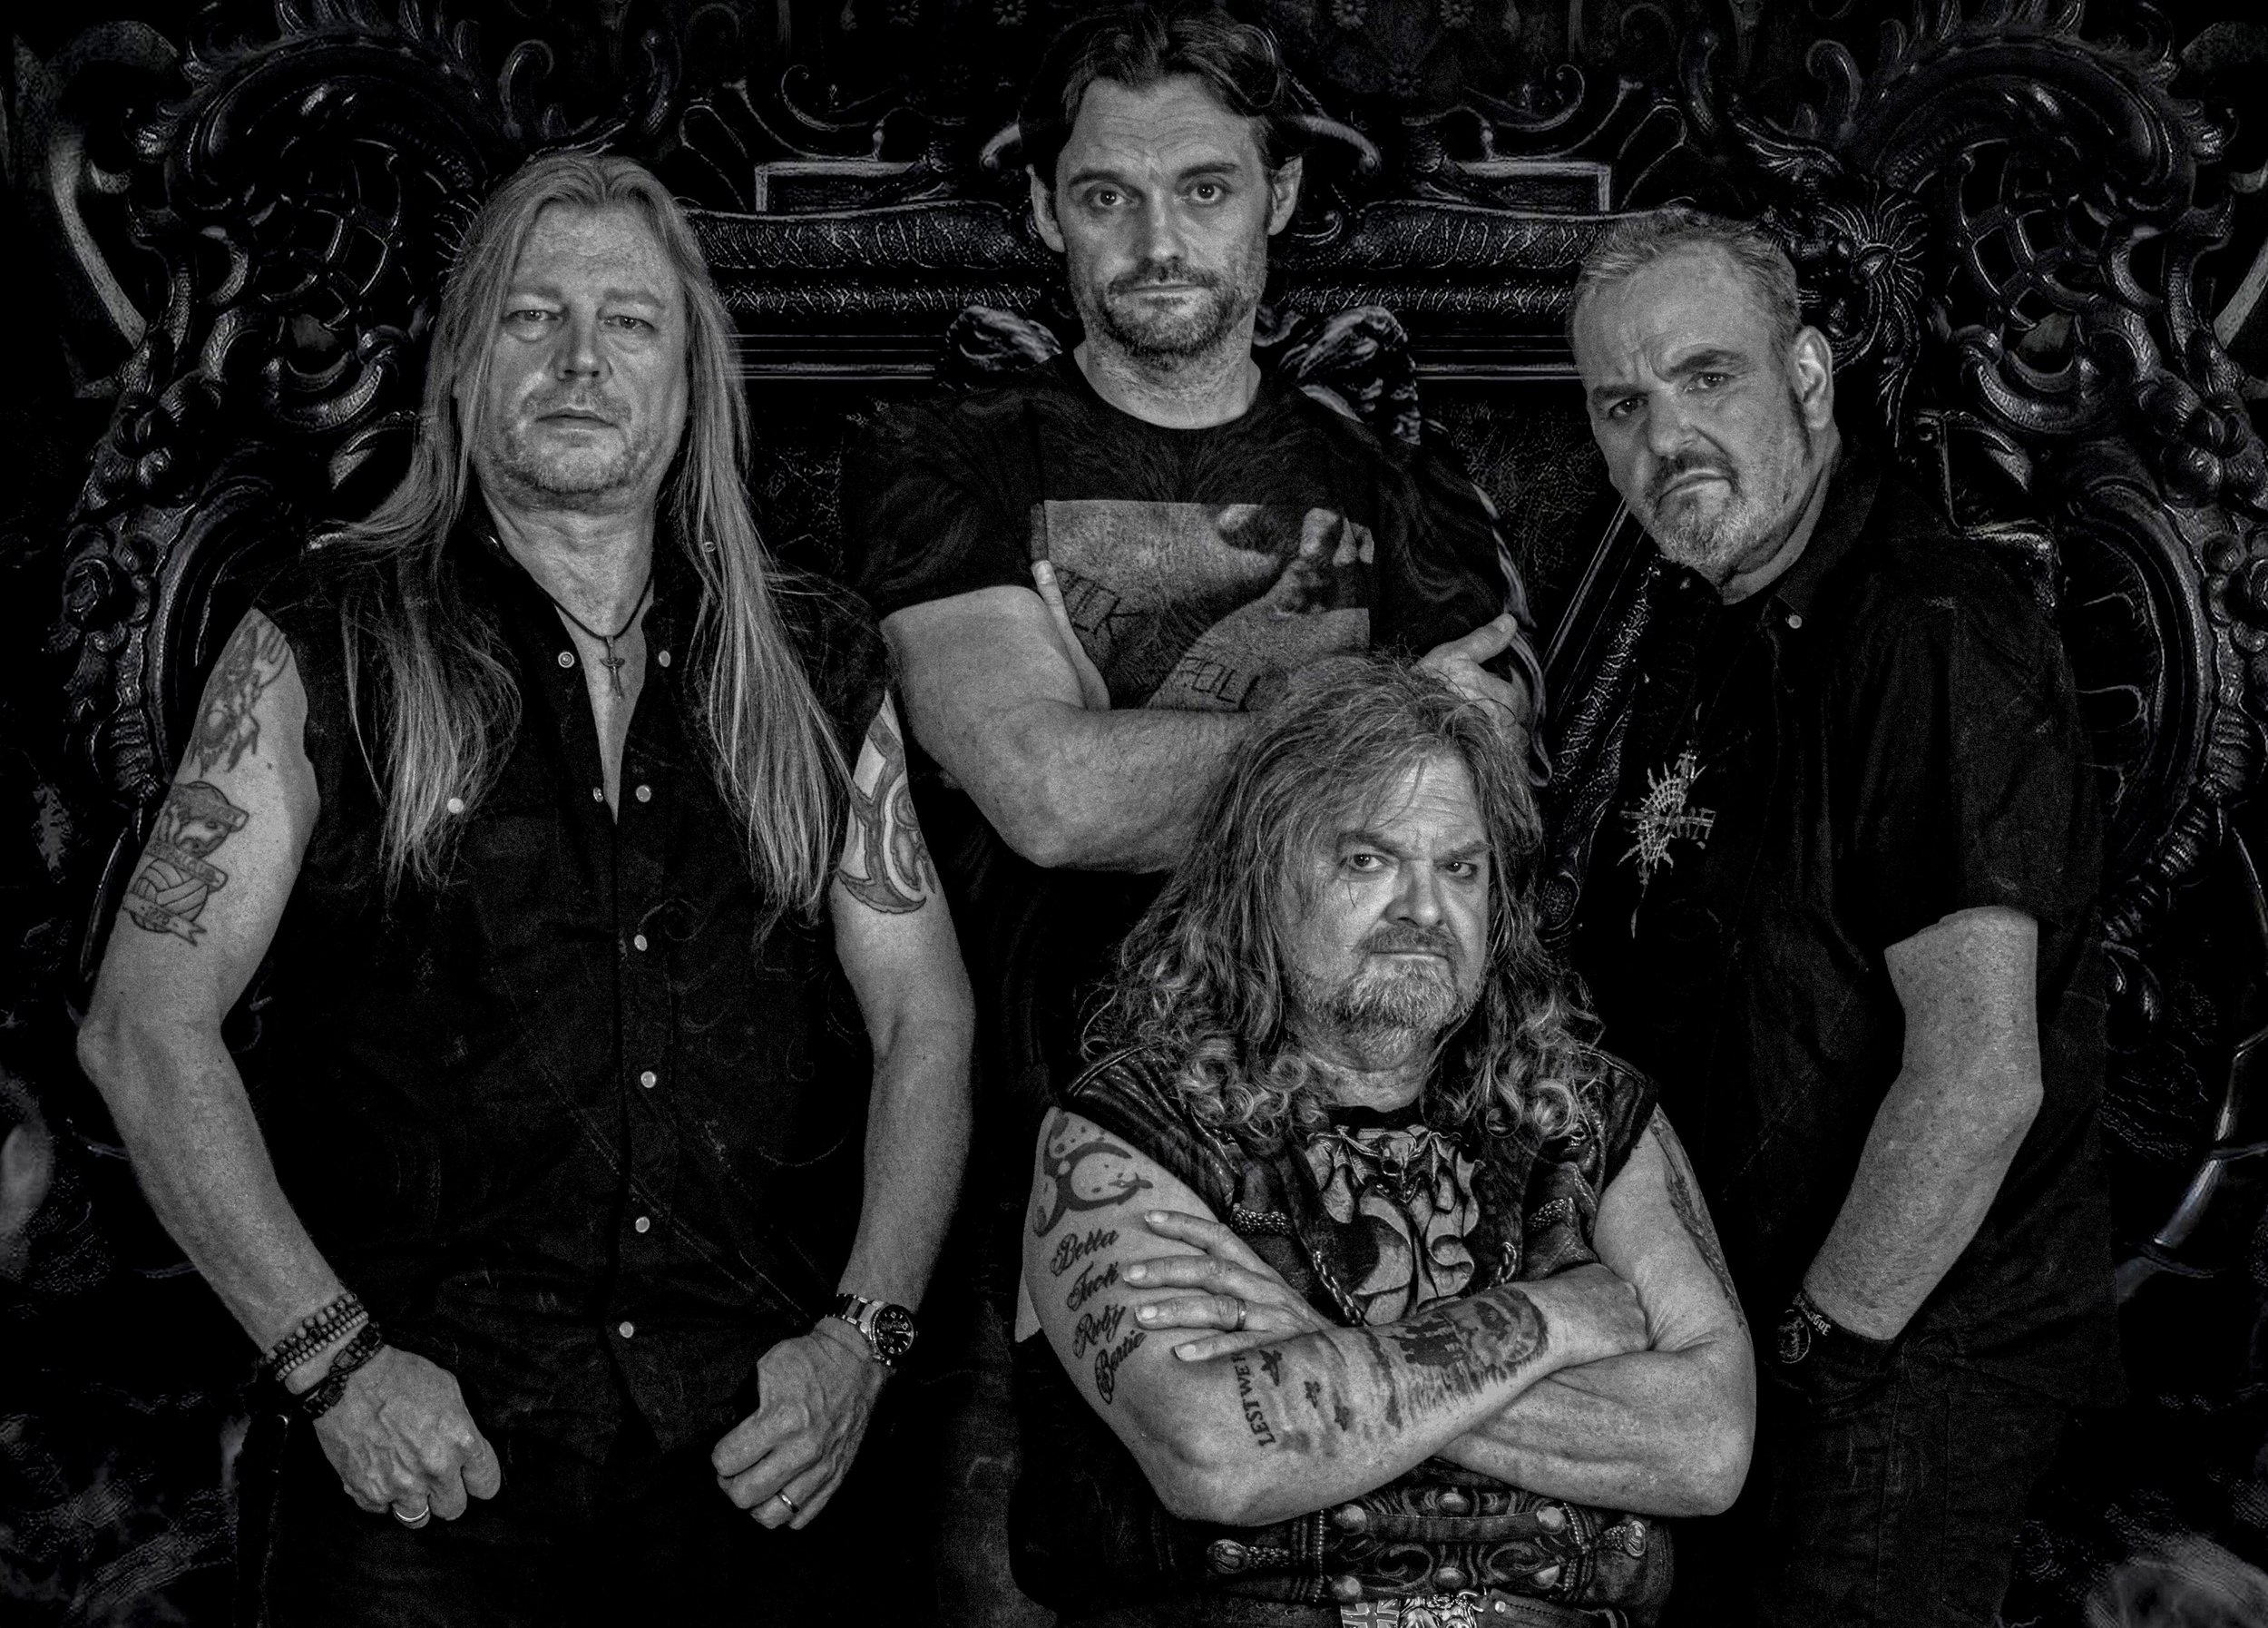  Steve Grimmett’s Grim Reaper has embarked this weekend on a new tour after the original vocalist of the New Wave of British Heavy Metal band had his right leg amputated four months after his previous San Antonio visit in October 2016 (photo courtesy